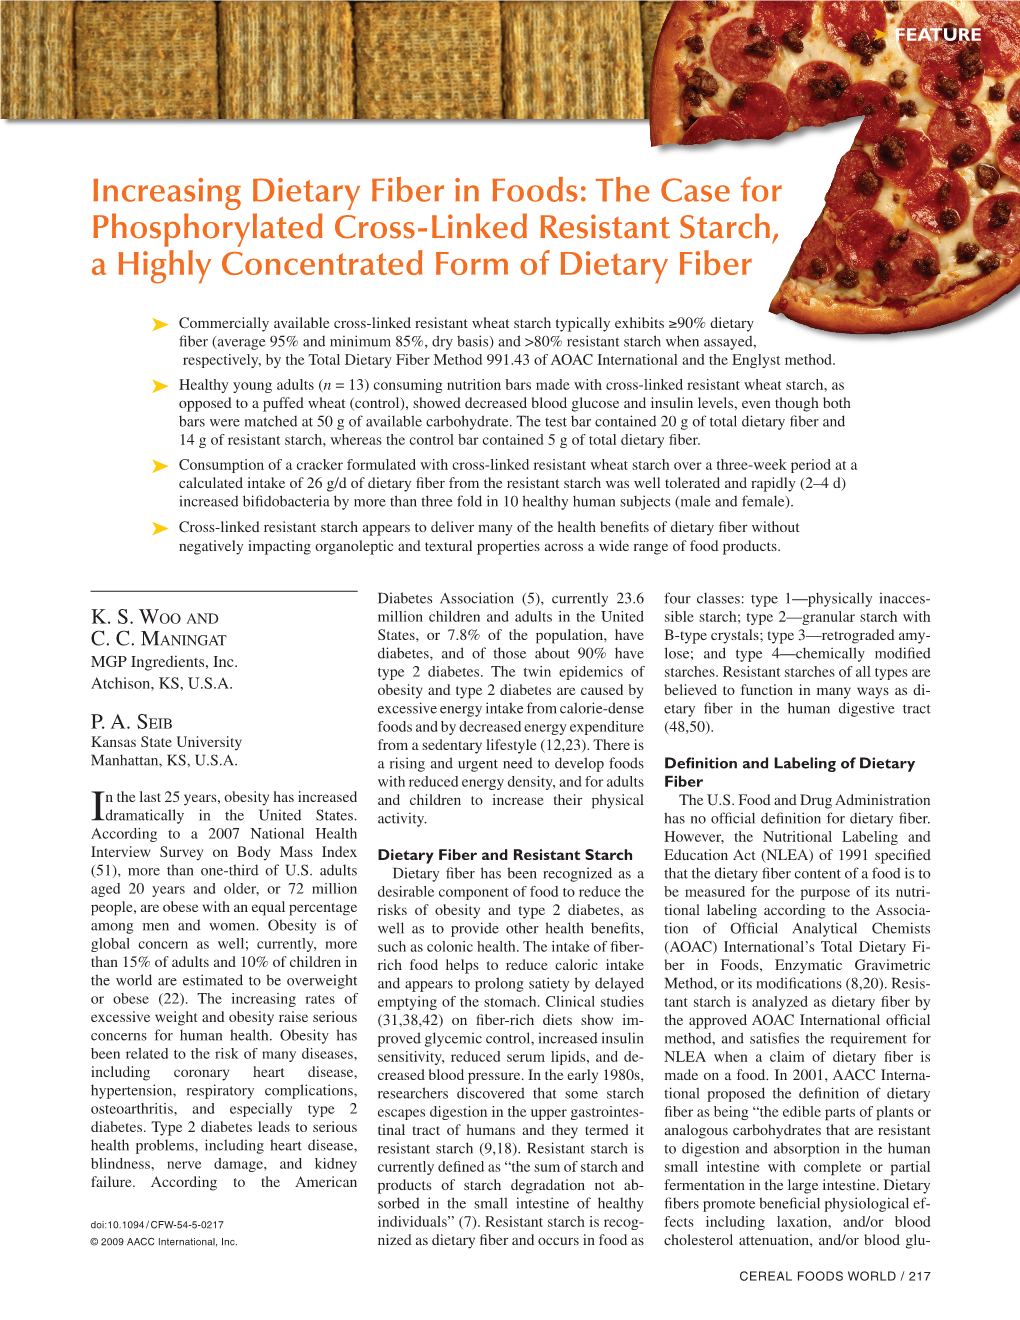 Increasing Dietary Fiber in Foods: the Case for Phosphorylated Cross-Linked Resistant Starch, a Highly Concentrated Form of Dietary Fiber